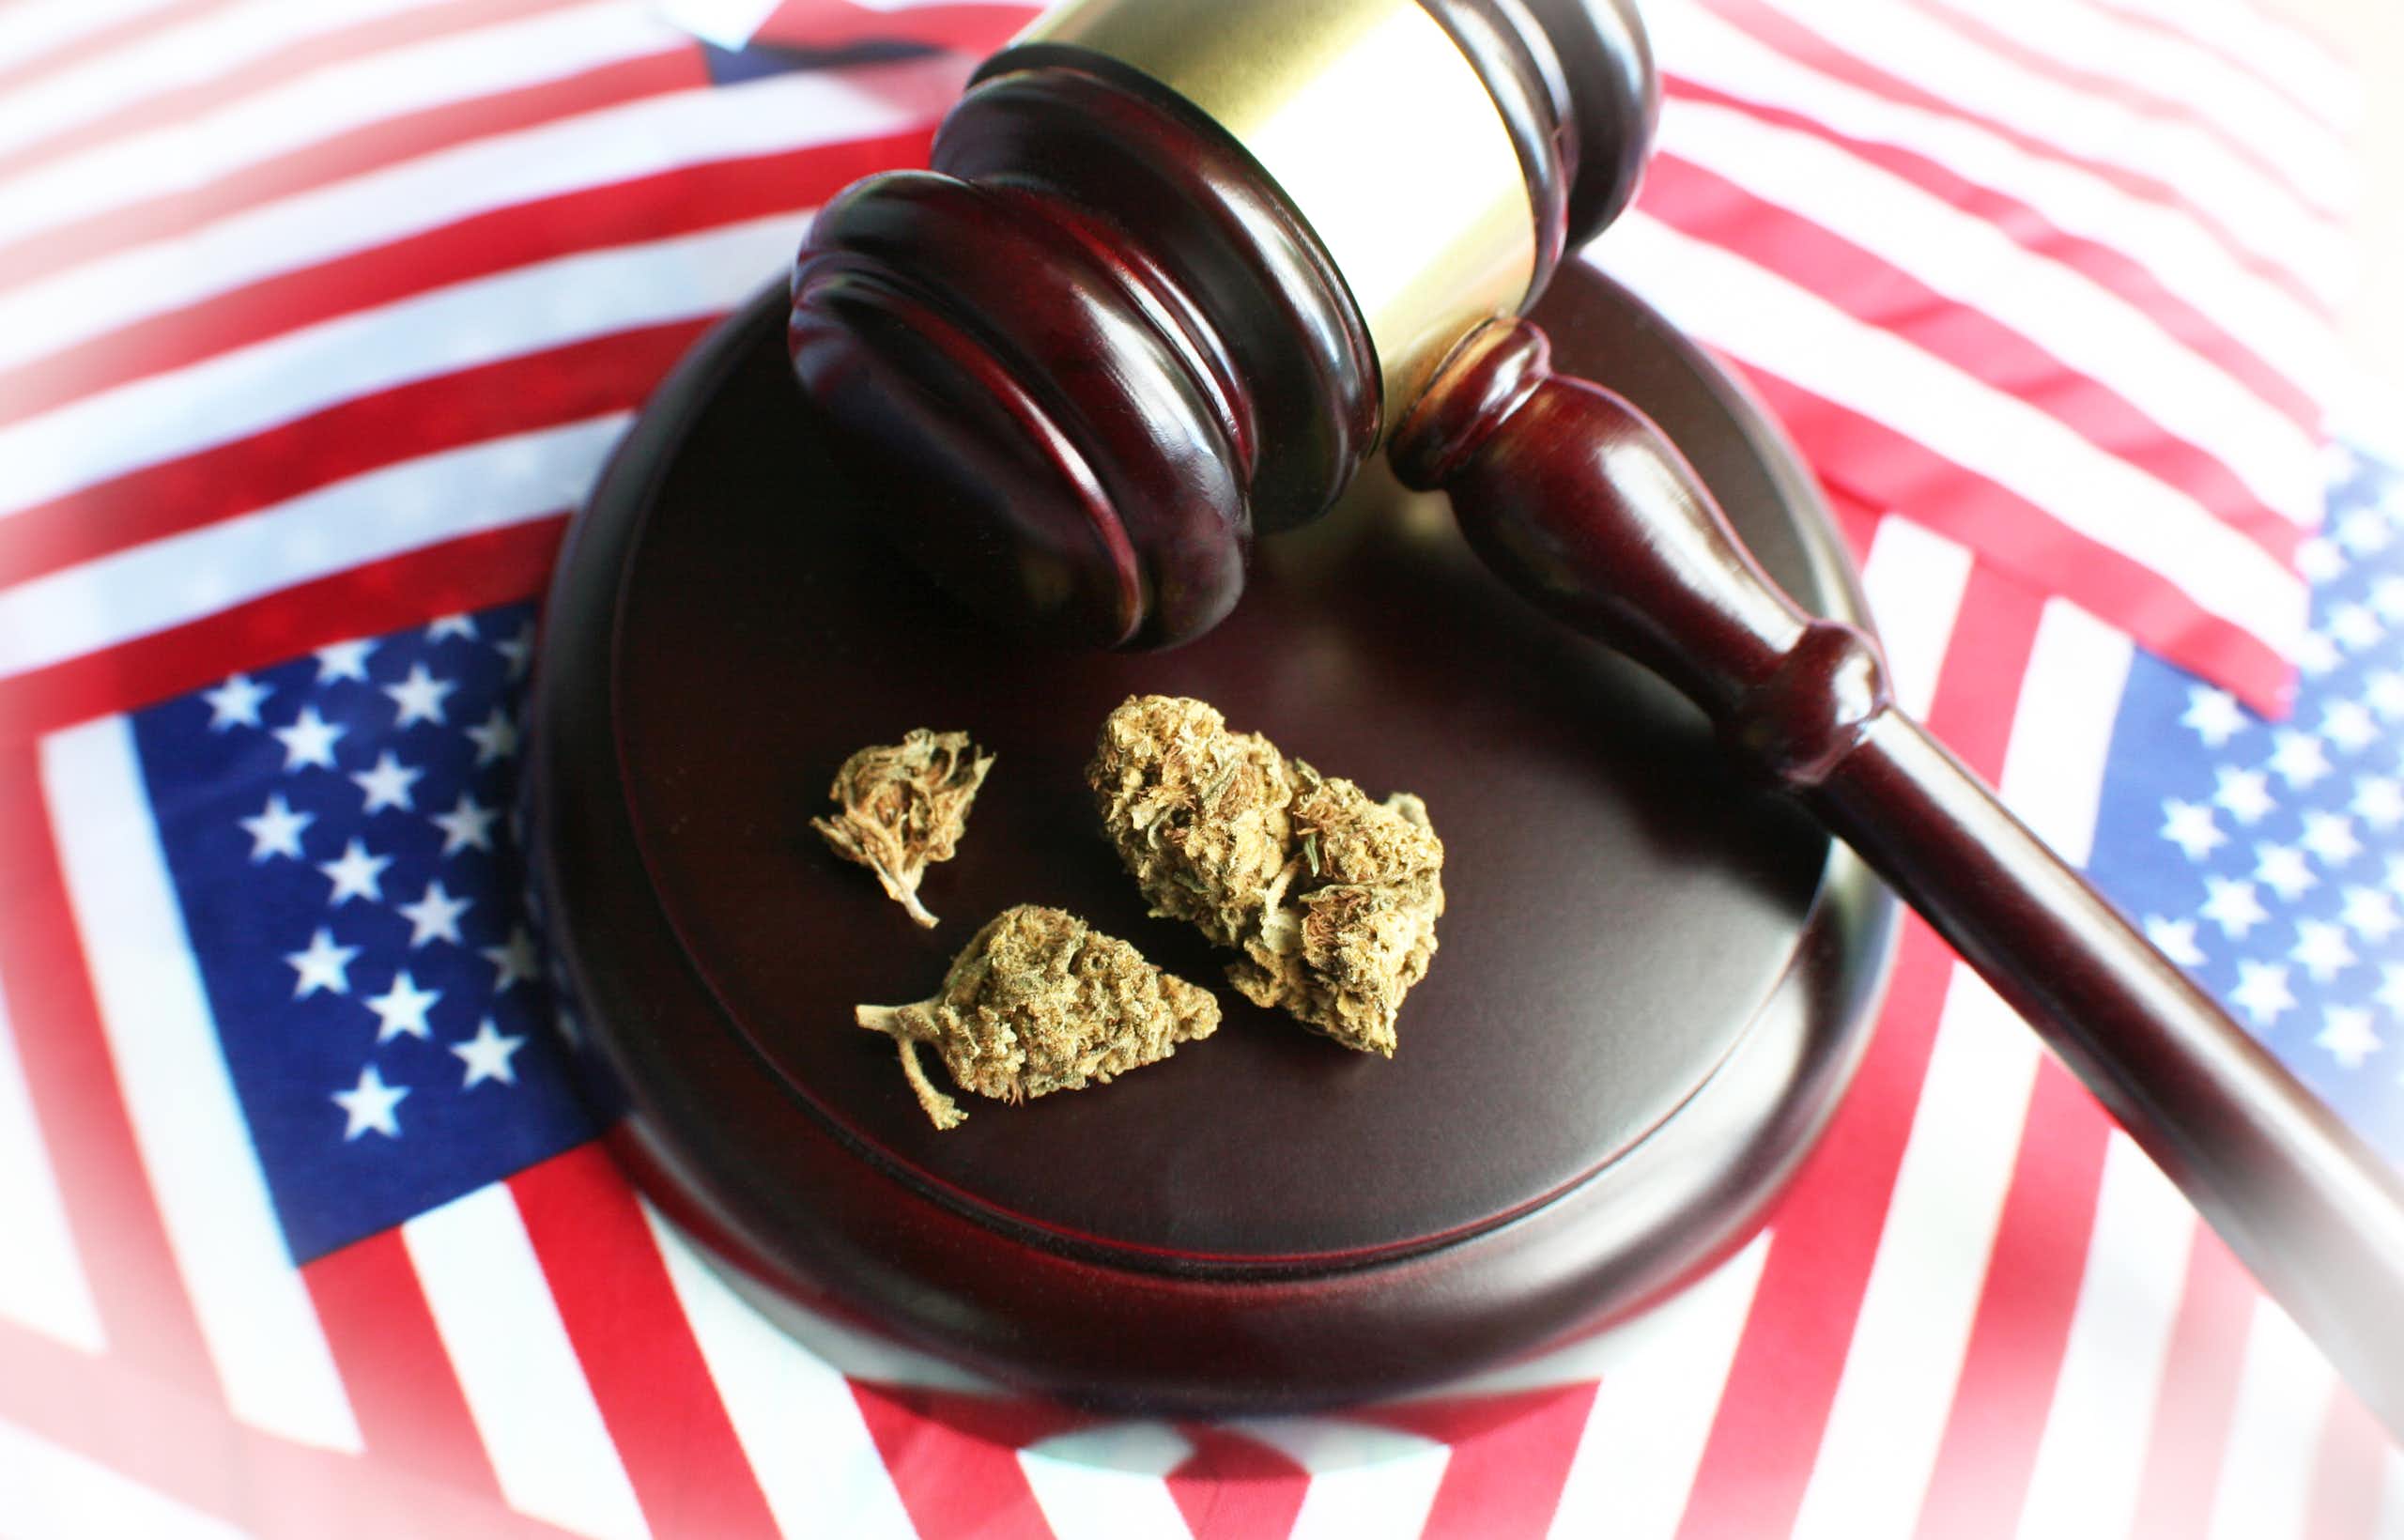 A few buds of marijuana sit on a sound block next to a judge's gavel. American flags are in the background.